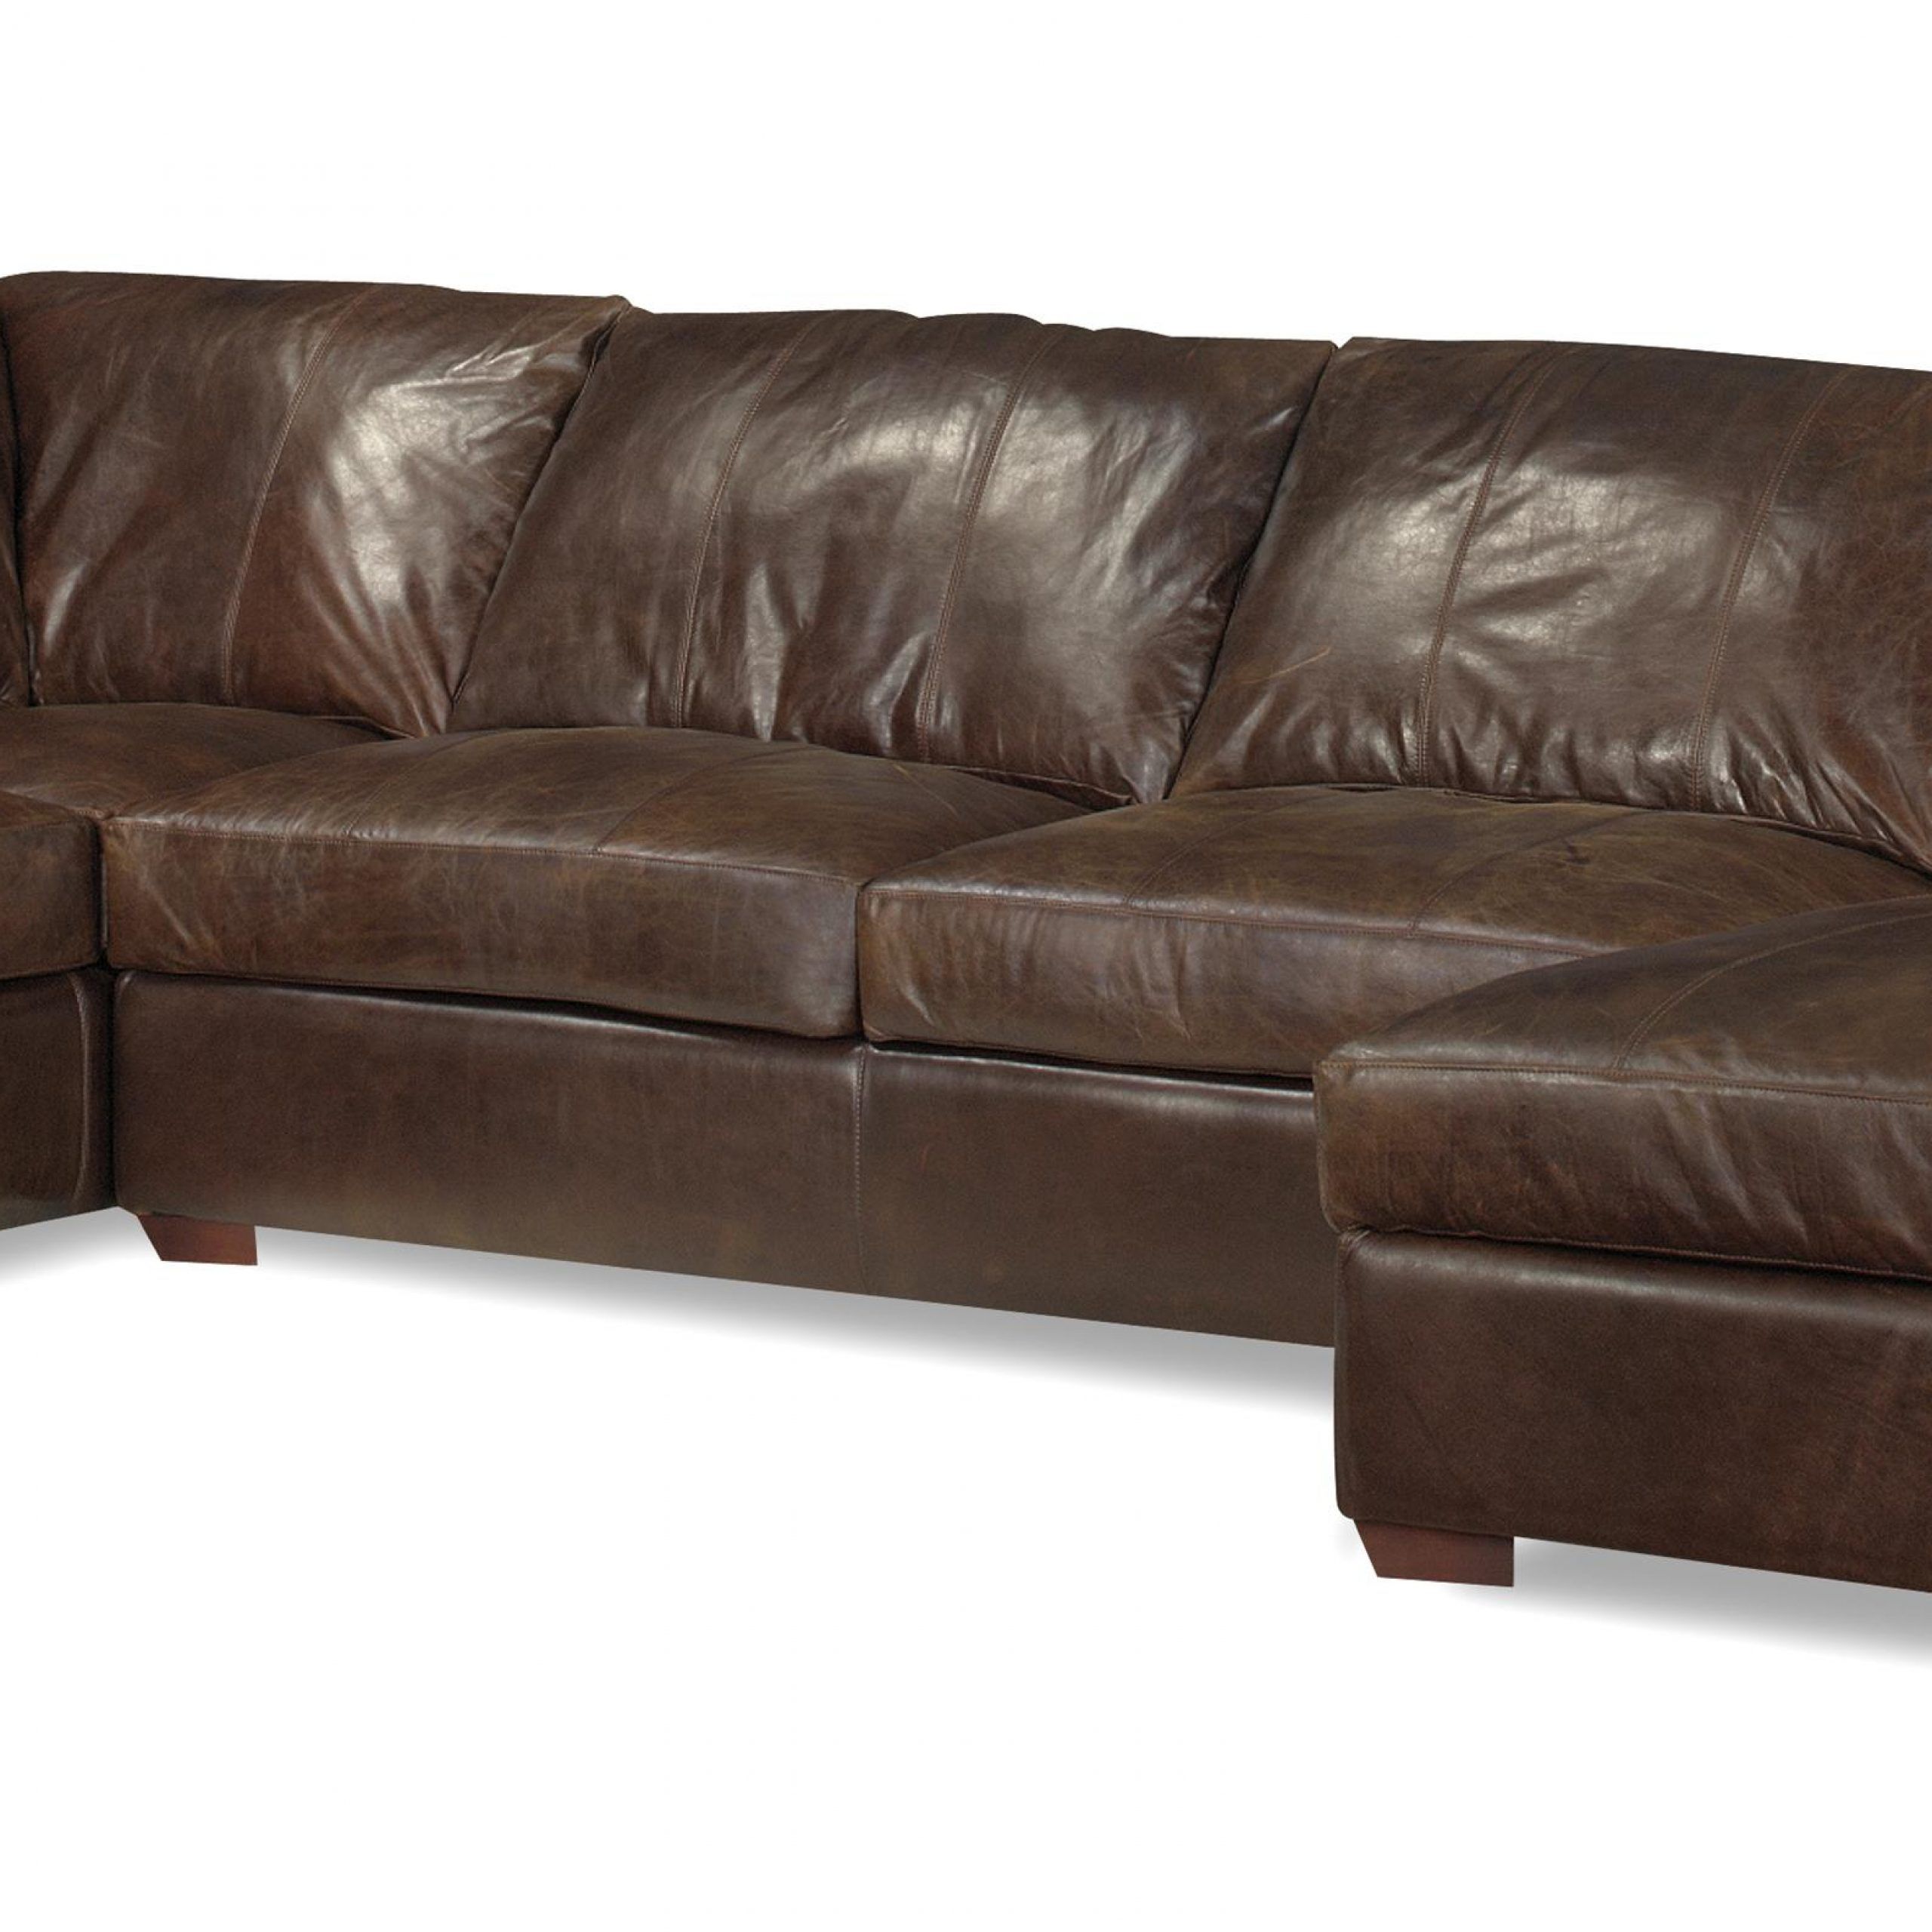 Leather Chaise Sectional Sofa Abbyson Tuscan Top Grain Regarding 3Pc Miles Leather Sectional Sofas With Chaise (View 5 of 15)